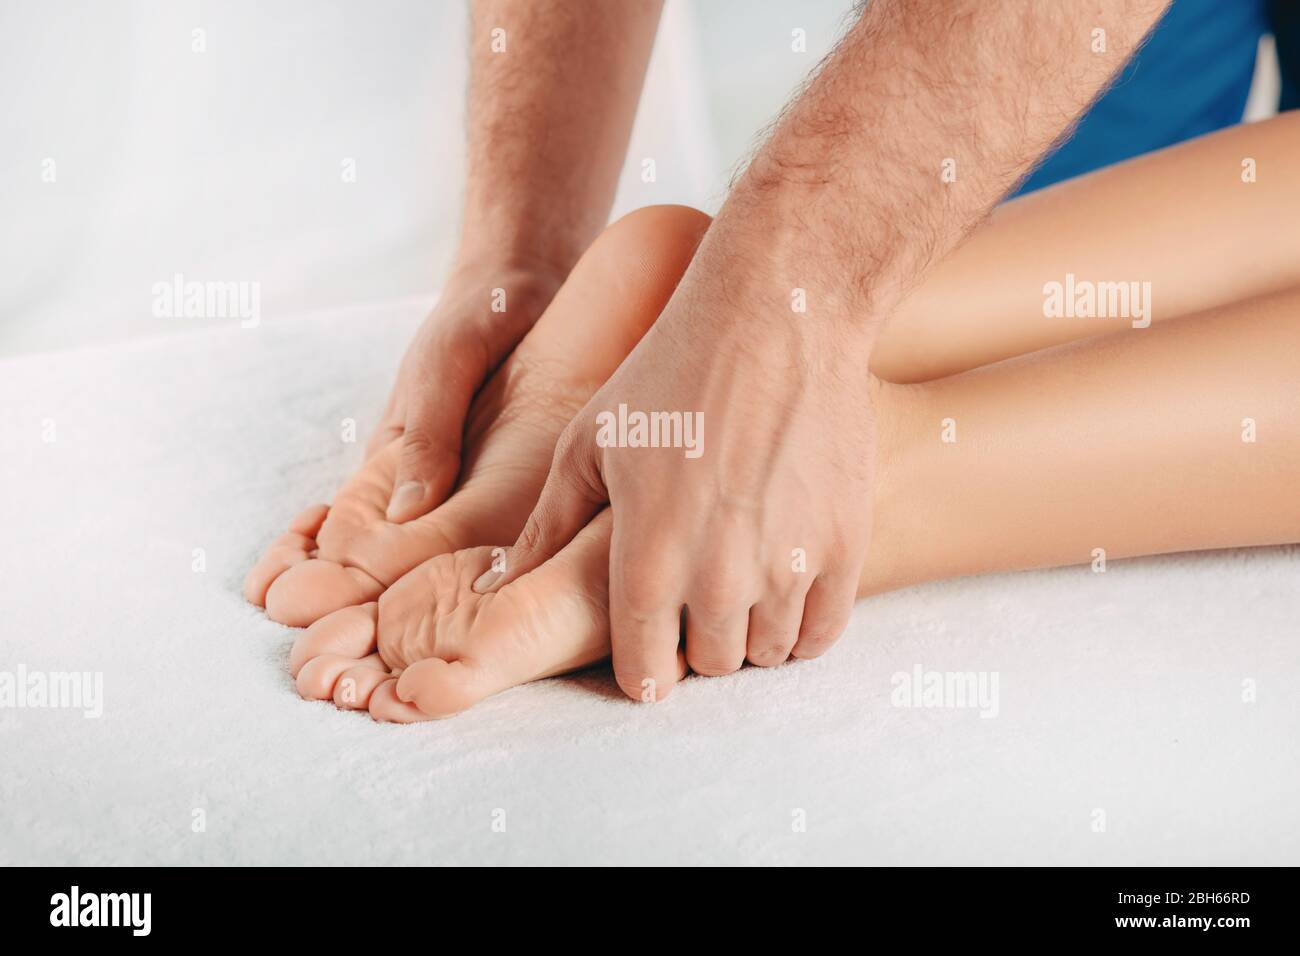 reflexology, foot massage. male masseur massages special points on the female foot. relaxing foot massage Stock Photo